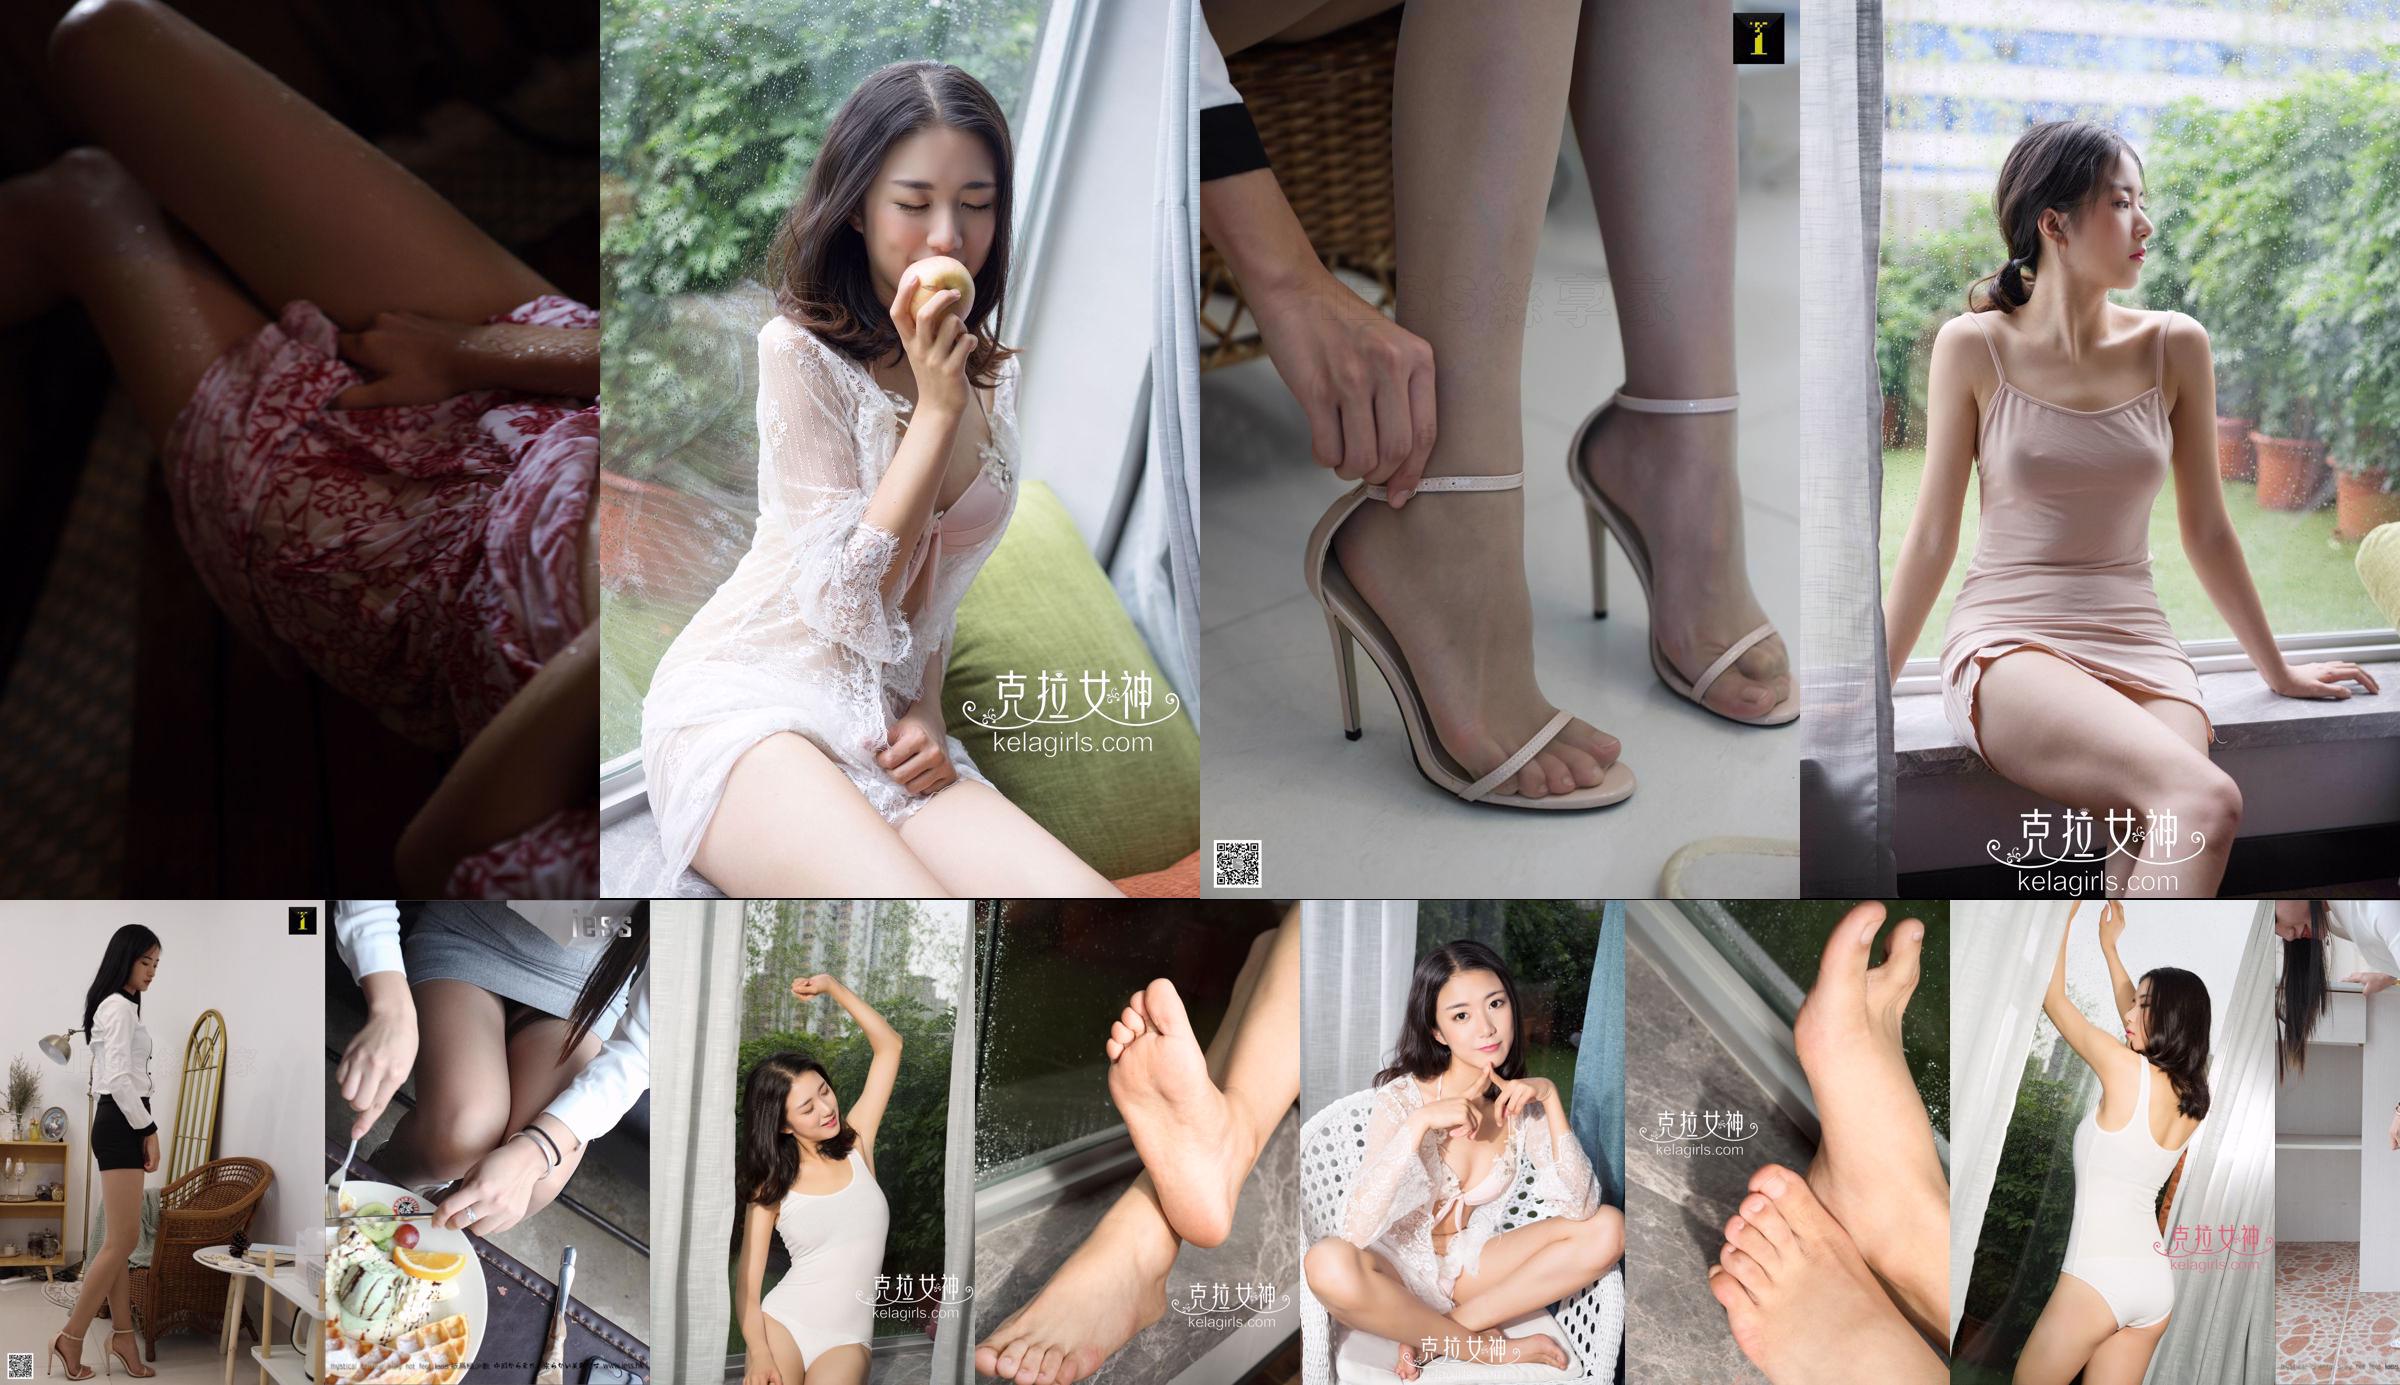 Ning Ning "Ning Ning One Word Buttoning Liang Gao" [Iss to IESS] Beautiful legs and silk feet No.bd5915 Page 1